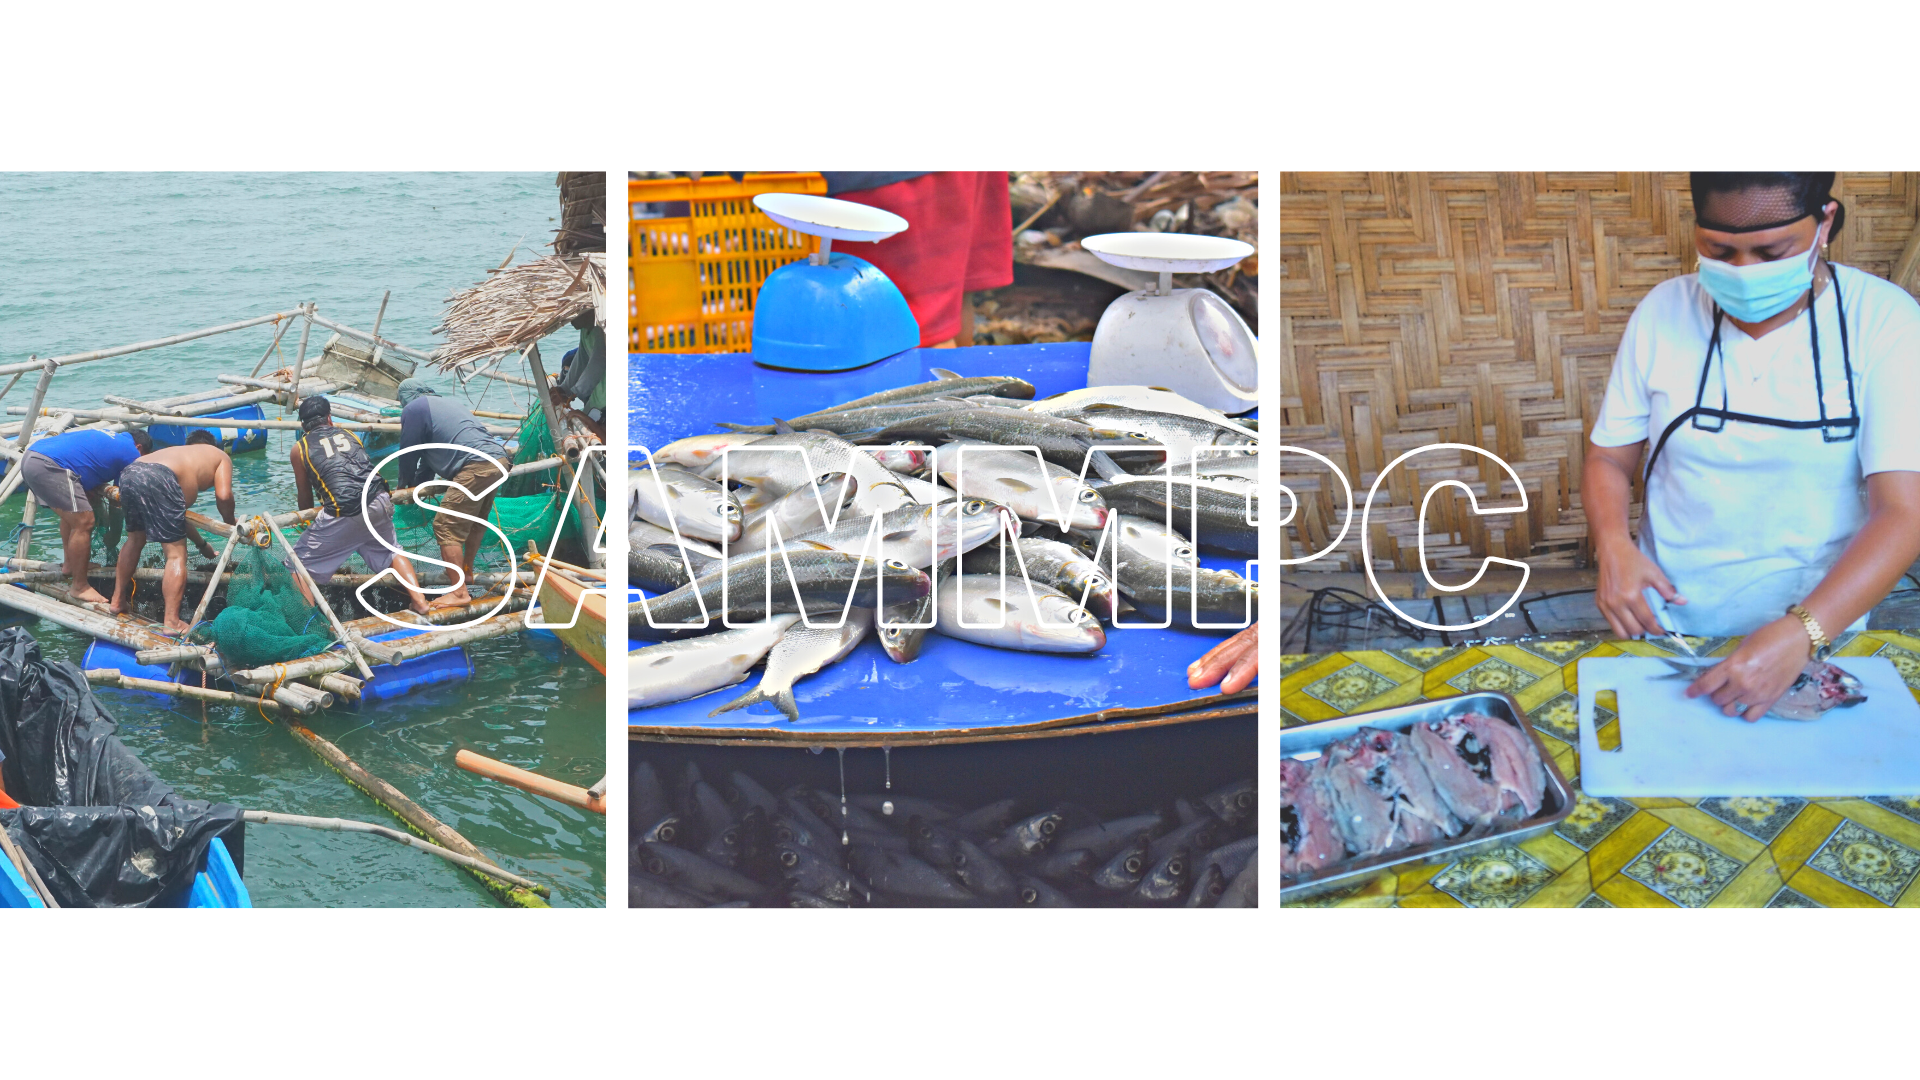 SAMMPC continues to generate millions in revenue from milkfish in pen culture